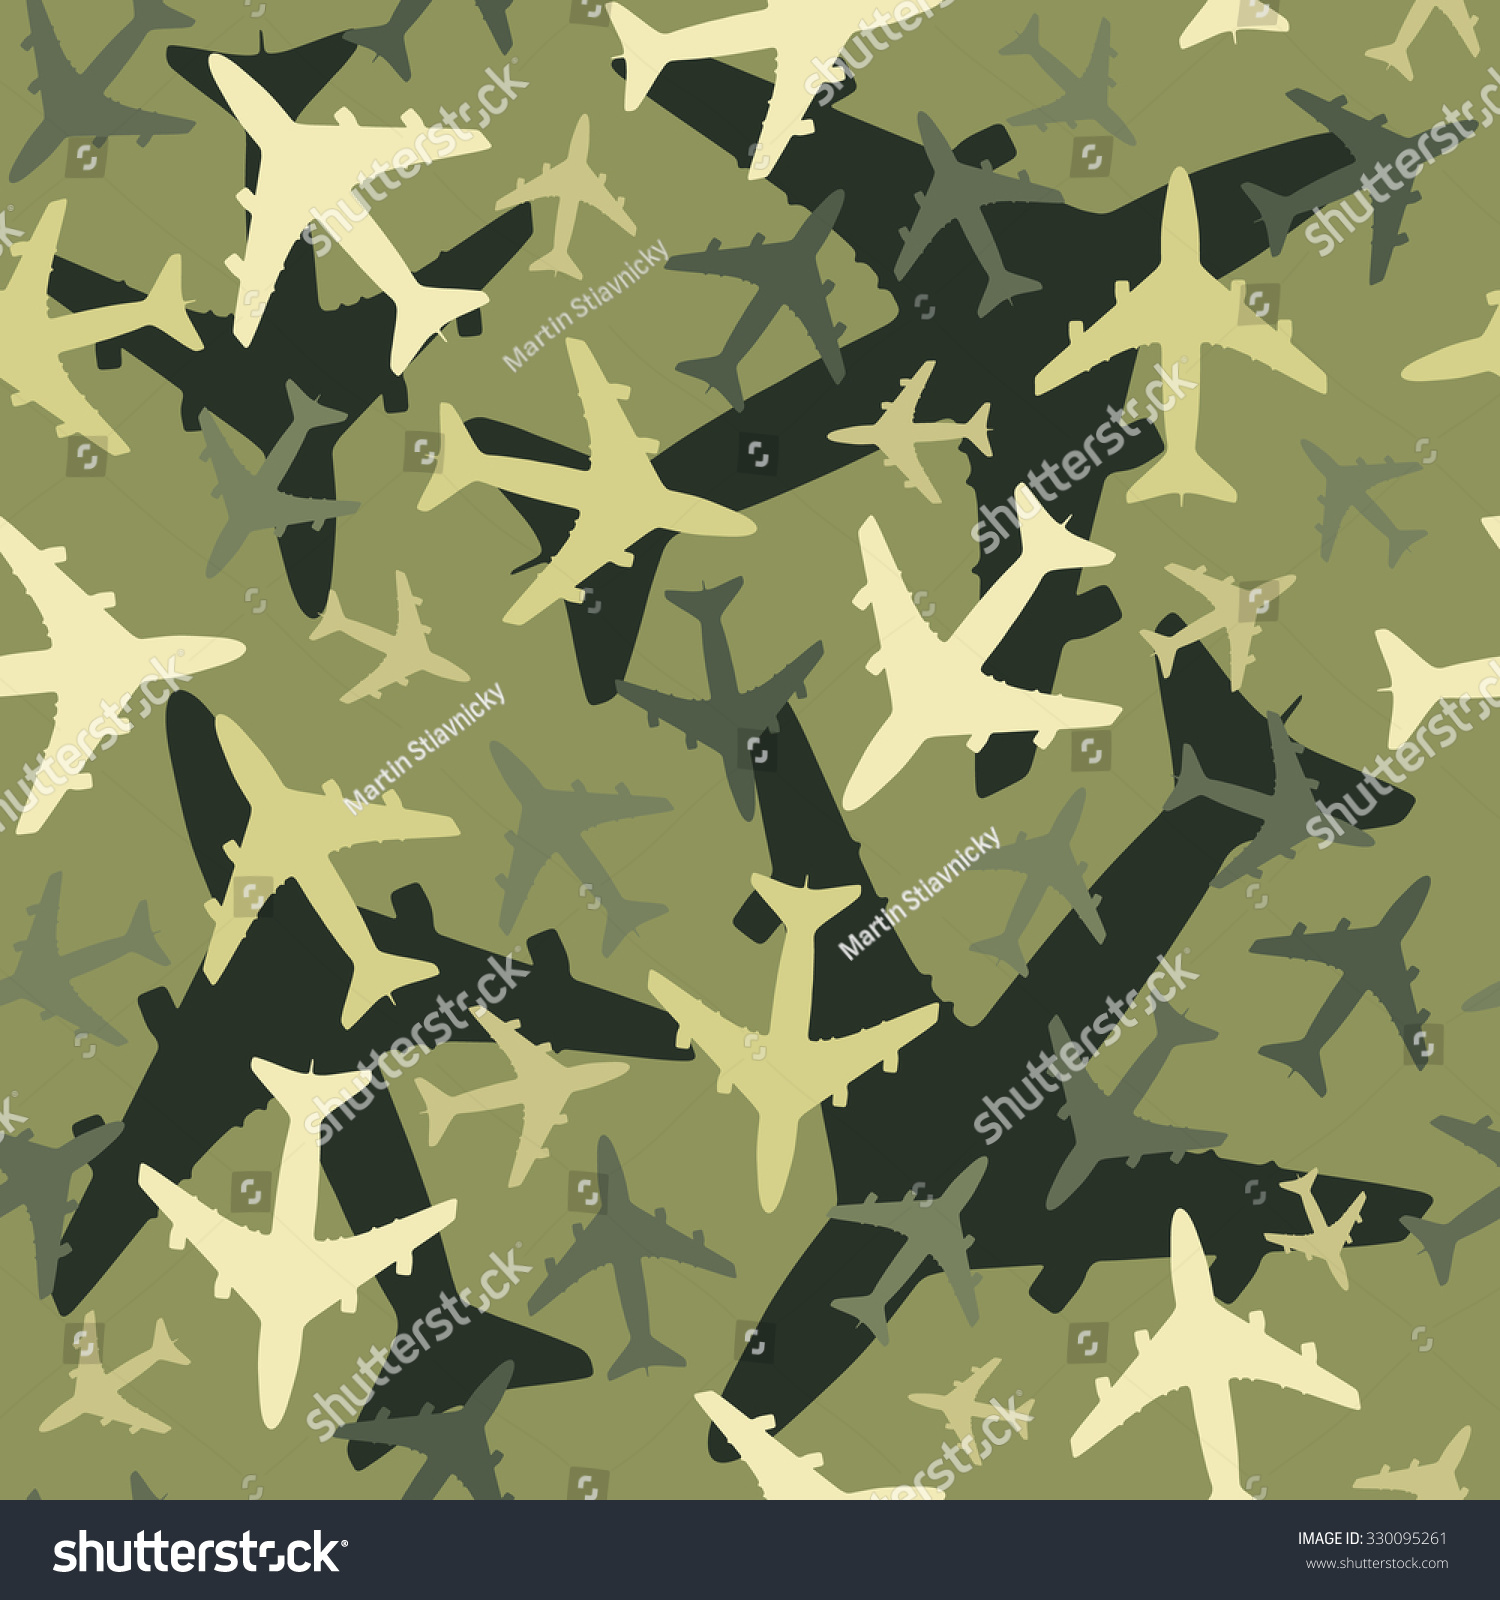 SVG of Seamless background pattern with airplanes. Green military camouflage version. Vector. svg